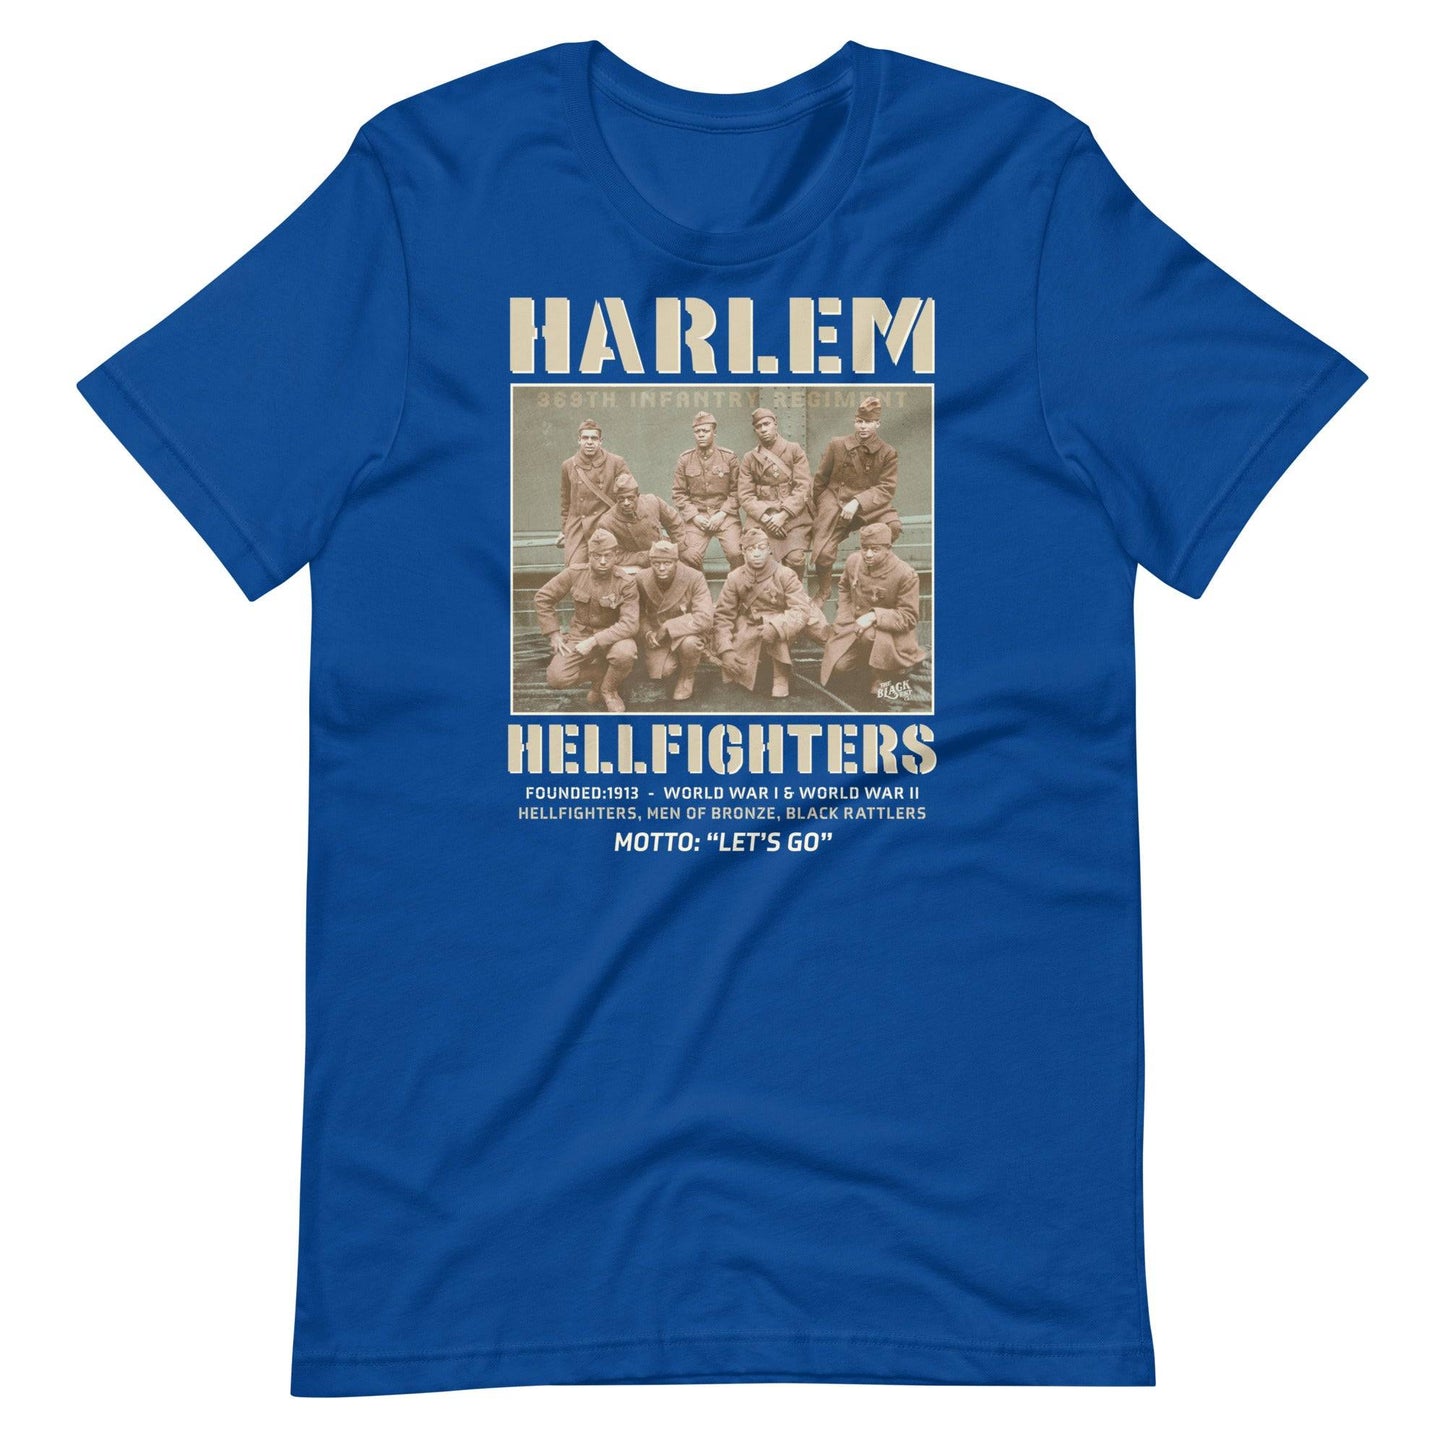 royal blue t shirt with an image of the harlem hellfighters graphic design